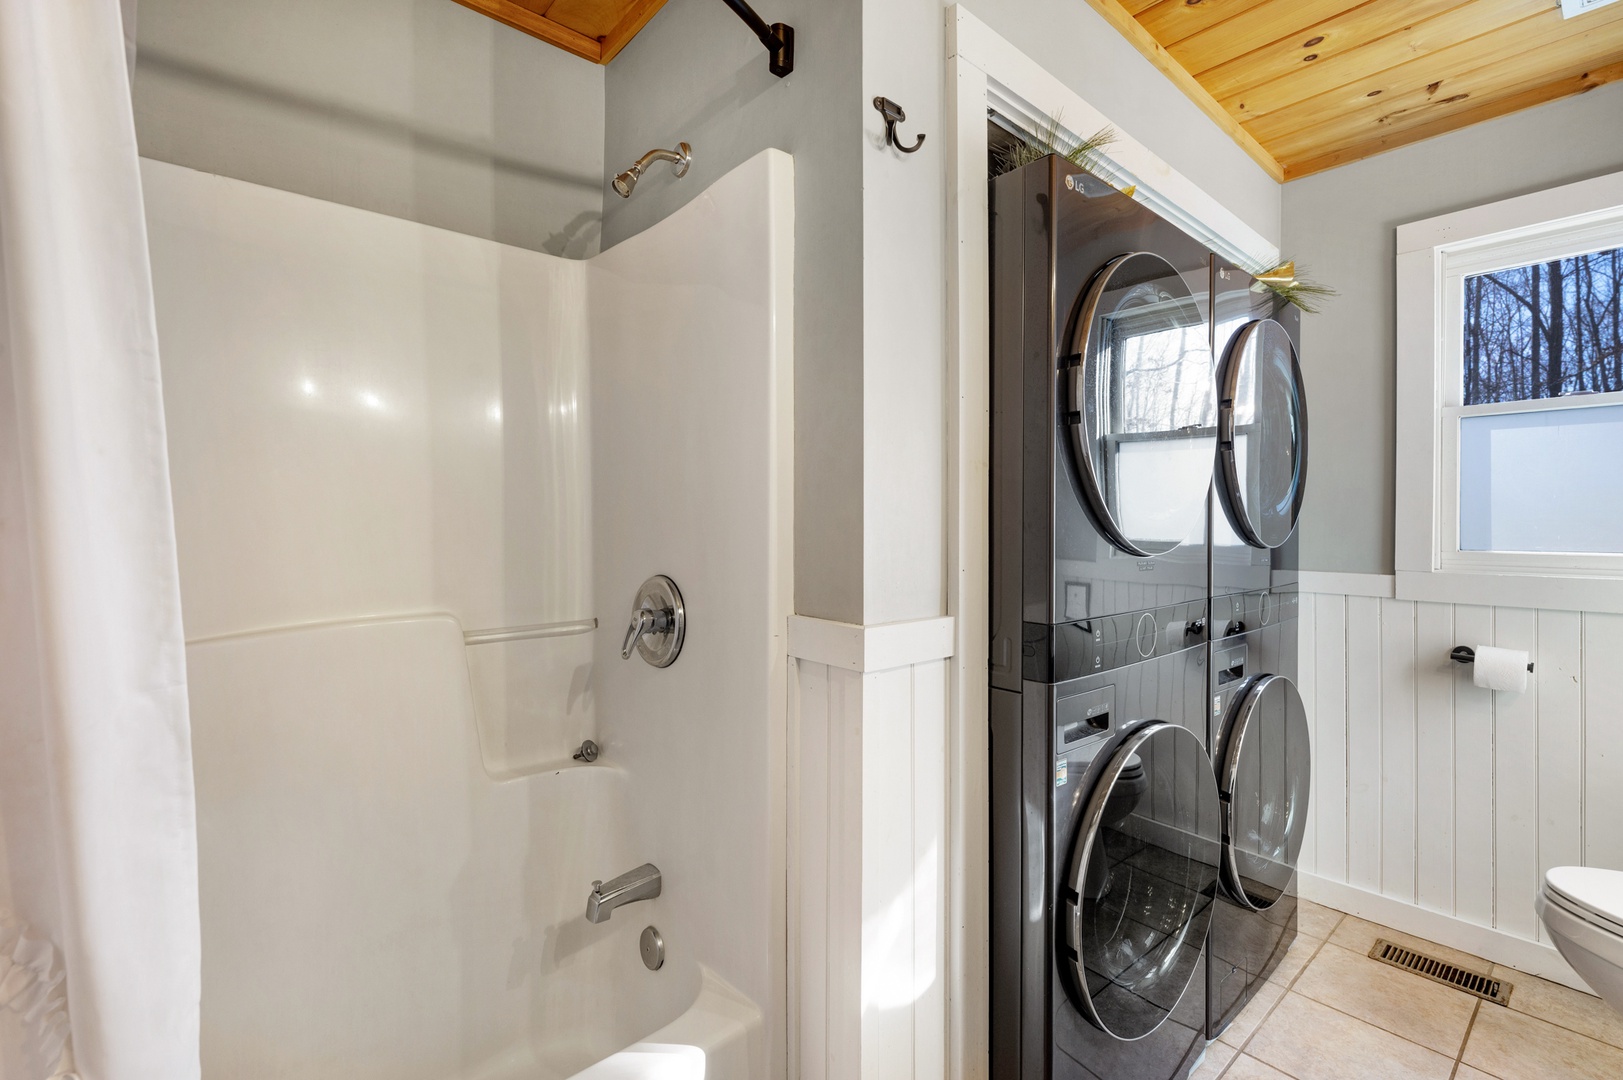 Above It All - Entry Level Dual washer dryer